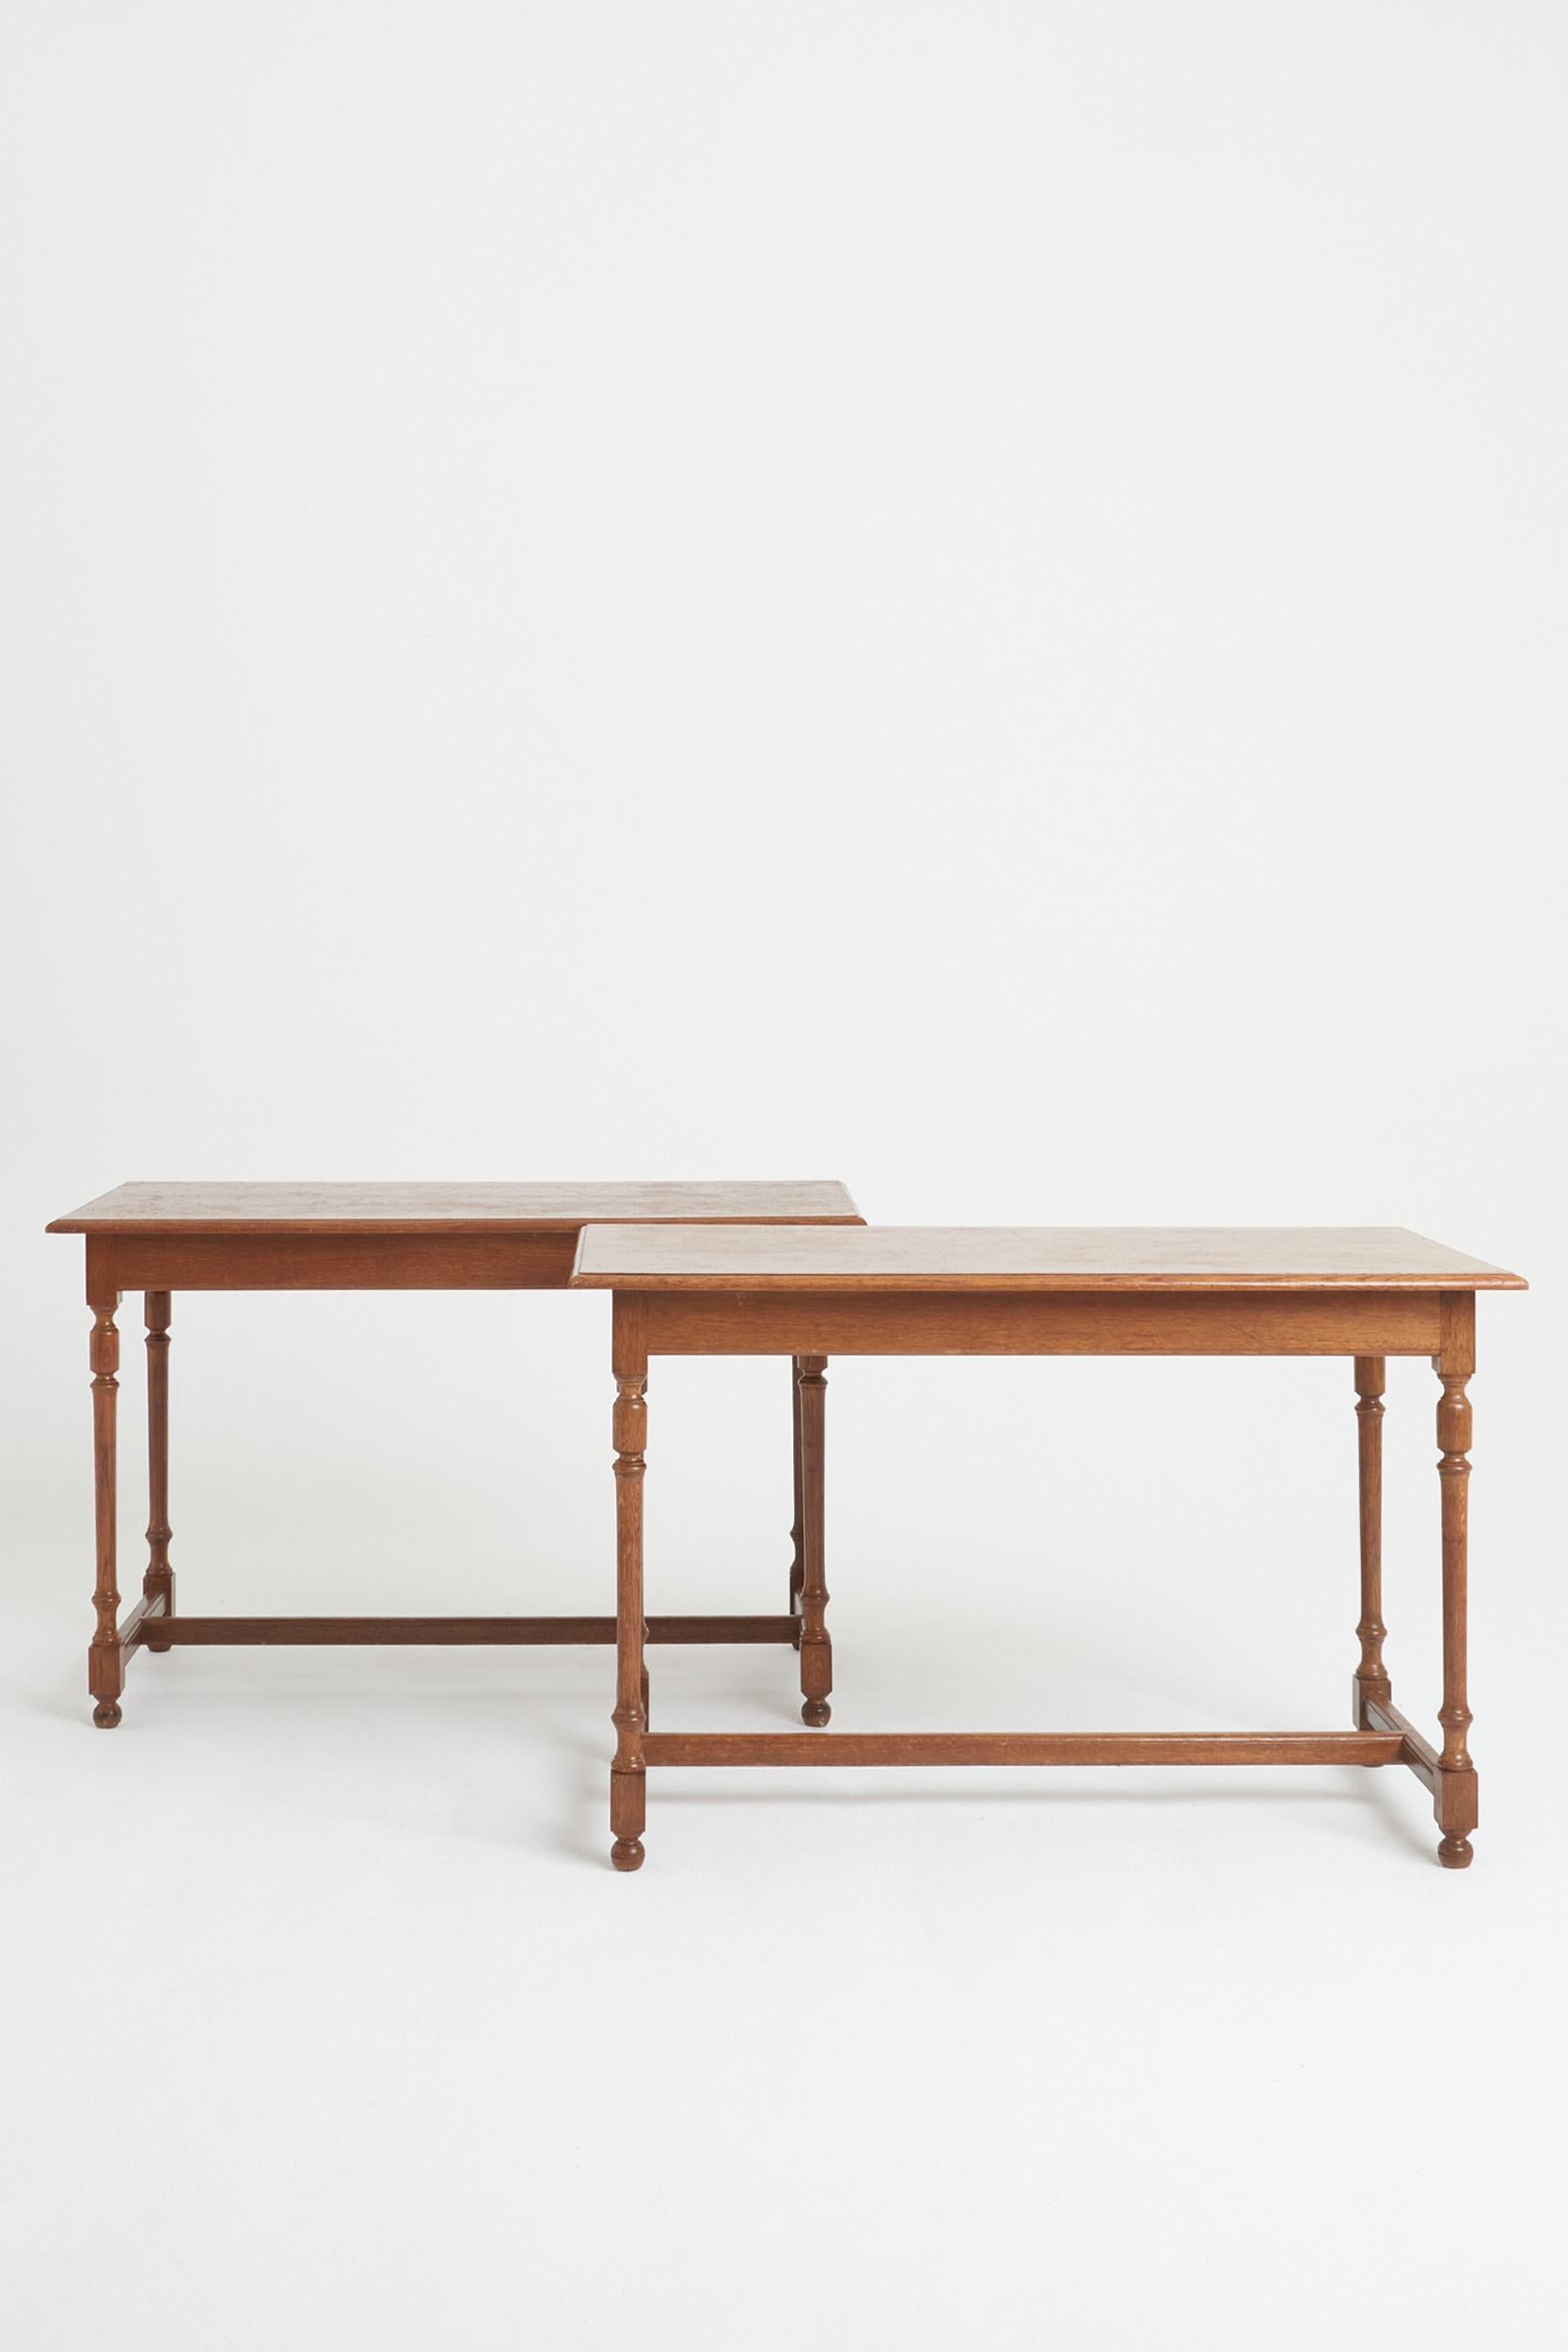 A pair of oak console tables
England, 1930s
75 cm high by 120 cm wide by 59.5 cm wide